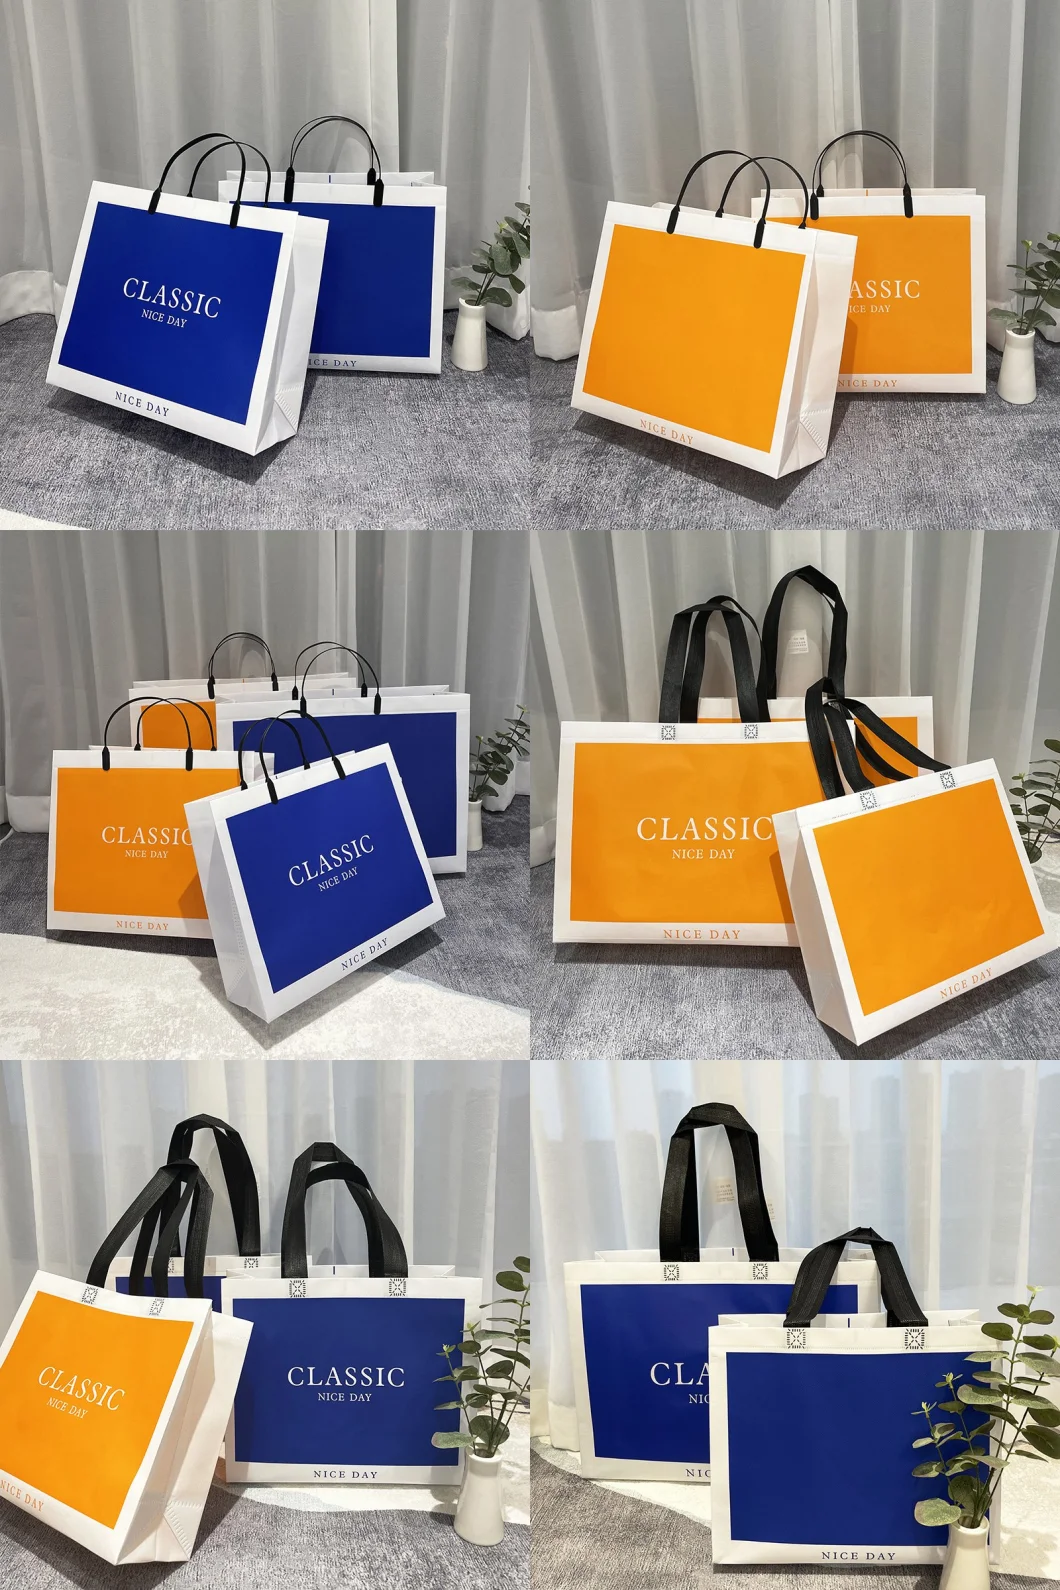 Wholesale Custom Logo New Fashion Design Shopping Packaging Tote Bag Personalized Eco PP Reusable Non Woven Bag